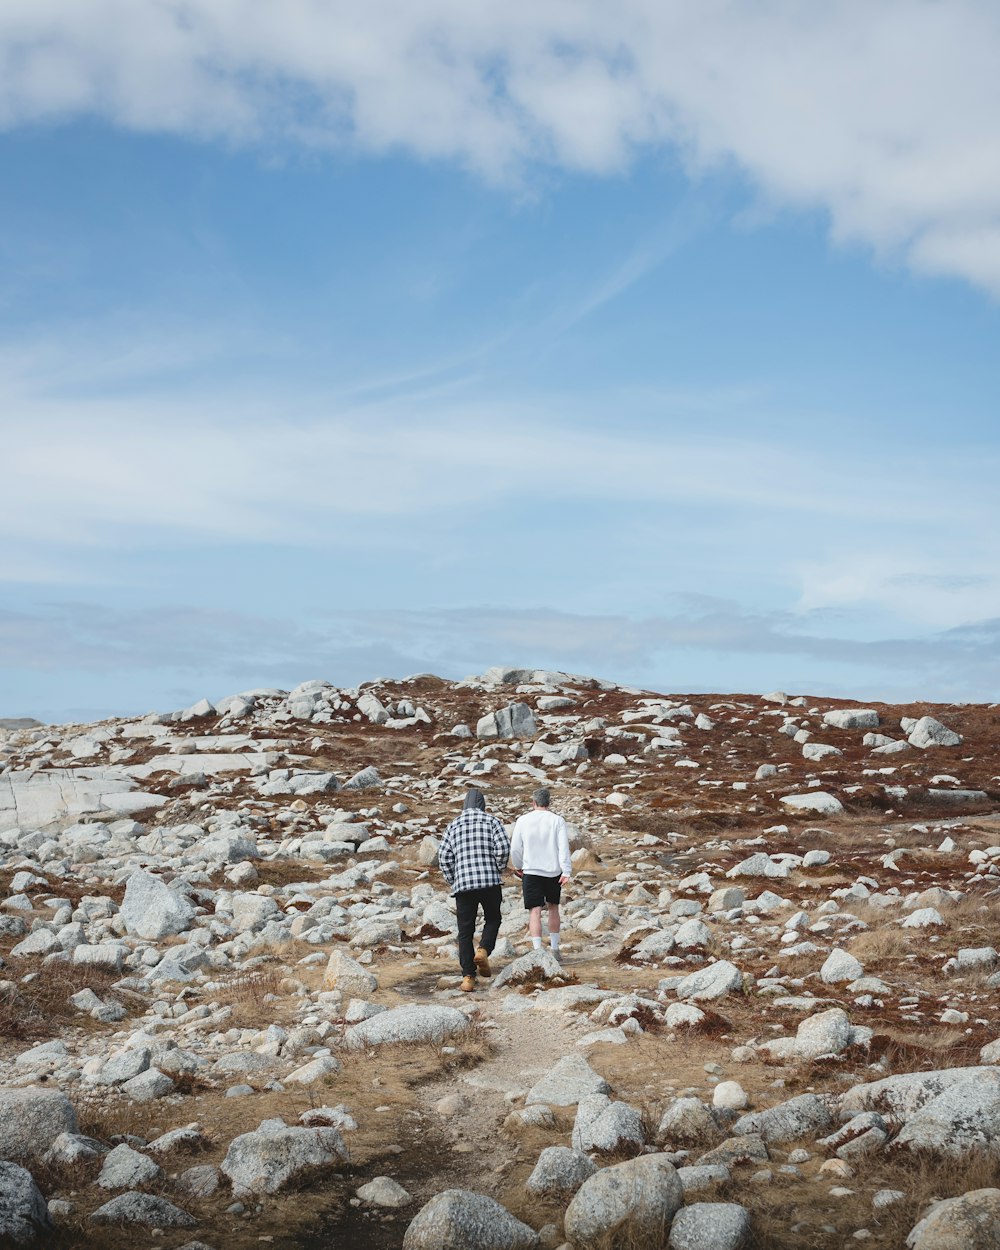 man and woman walking on rocky hill under blue sky during daytime